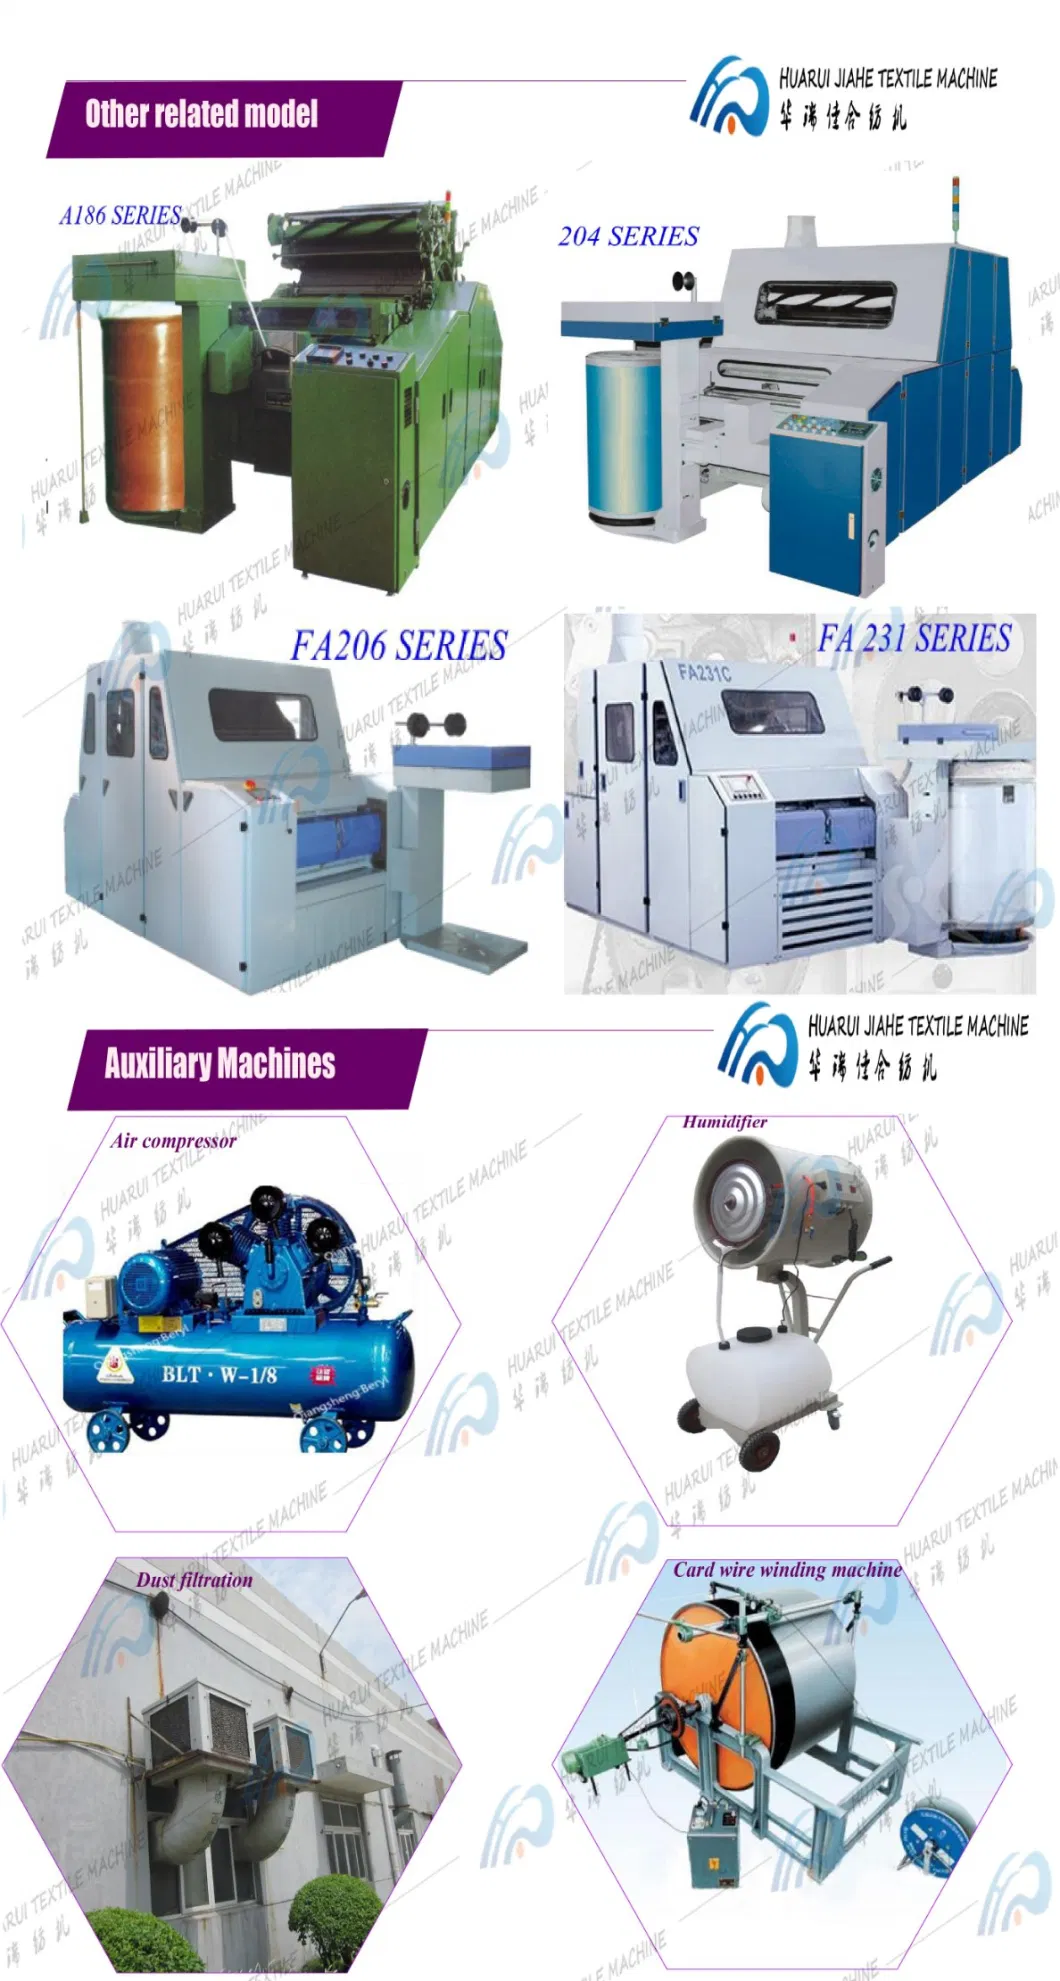 Better Dyeing Machine, Cone Yarn, Hank Cotton, Polyester and Woolen Yarn Dual-Purpose Dryer Made in China